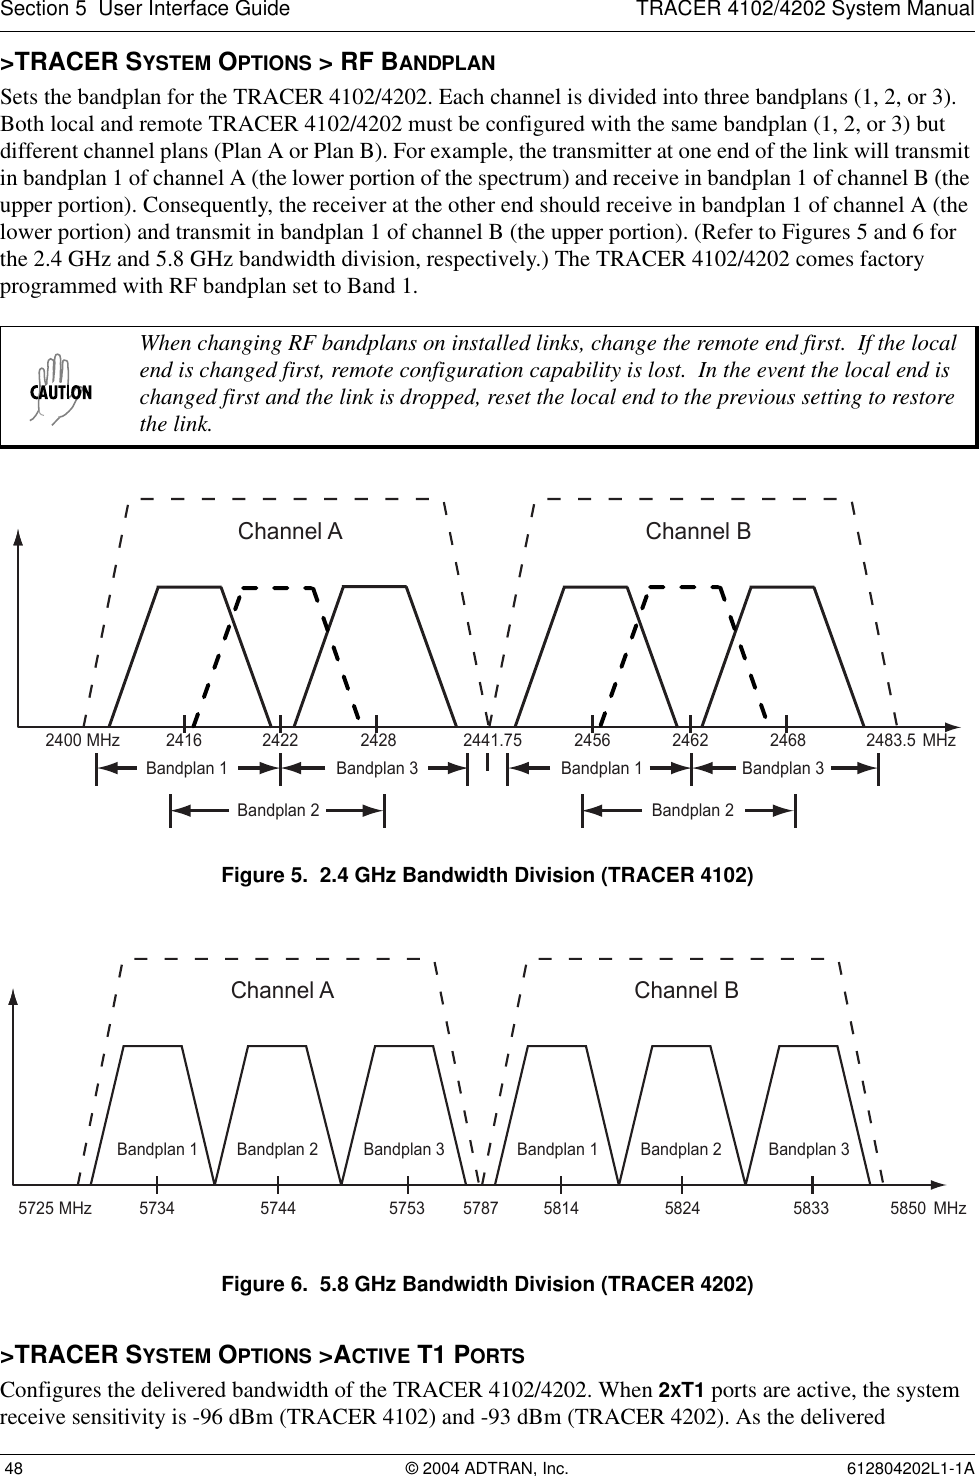 Section 5  User Interface Guide TRACER 4102/4202 System Manual 48 © 2004 ADTRAN, Inc. 612804202L1-1A&gt;TRACER SYSTEM OPTIONS &gt; RF BANDPLANSets the bandplan for the TRACER 4102/4202. Each channel is divided into three bandplans (1, 2, or 3). Both local and remote TRACER 4102/4202 must be configured with the same bandplan (1, 2, or 3) but different channel plans (Plan A or Plan B). For example, the transmitter at one end of the link will transmit in bandplan 1 of channel A (the lower portion of the spectrum) and receive in bandplan 1 of channel B (the upper portion). Consequently, the receiver at the other end should receive in bandplan 1 of channel A (the lower portion) and transmit in bandplan 1 of channel B (the upper portion). (Refer to Figures 5 and 6 for the 2.4 GHz and 5.8 GHz bandwidth division, respectively.) The TRACER 4102/4202 comes factory programmed with RF bandplan set to Band 1.Figure 5.  2.4 GHz Bandwidth Division (TRACER 4102)Figure 6.  5.8 GHz Bandwidth Division (TRACER 4202)&gt;TRACER SYSTEM OPTIONS &gt;ACTIVE T1 PORTSConfigures the delivered bandwidth of the TRACER 4102/4202. When 2XT1 ports are active, the system receive sensitivity is -96 dBm (TRACER 4102) and -93 dBm (TRACER 4202). As the delivered When changing RF bandplans on installed links, change the remote end first.  If the local end is changed first, remote configuration capability is lost.  In the event the local end is changed first and the link is dropped, reset the local end to the previous setting to restore the link.Channel!A2416 2441.752422 24282400 MHz 2483.5!MHzBandplan!3Bandplan!2Bandplan!1Channel!B2456 2462 2468Bandplan!3Bandplan!2Bandplan!1Channel!A57345725 5787 58505744 5753MHz MHzBandplan!3Bandplan!2Bandplan!1Channel!B5814 5824 5833Bandplan!3Bandplan!2Bandplan!1